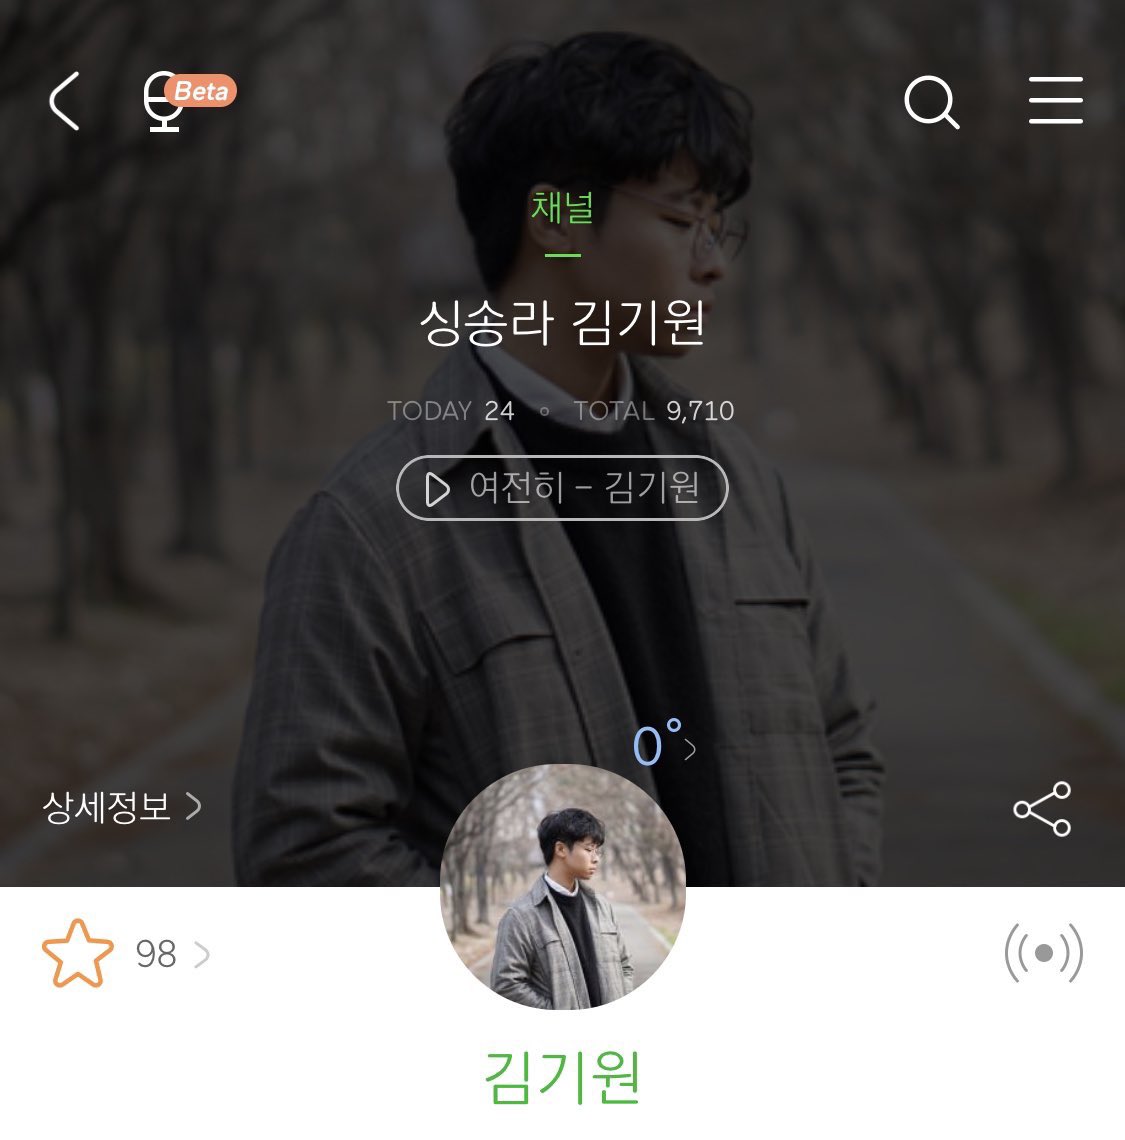 Kim Keewon (Singer/Songwriter) commented on 괜찬아도 괜찮아 (That’s Okay) Melon Comment Section“Ohoh... Uwaa...” #도경수  #디오  #DohKyungsoo  #괜찮아도_괜찮아  #ThatsOkay